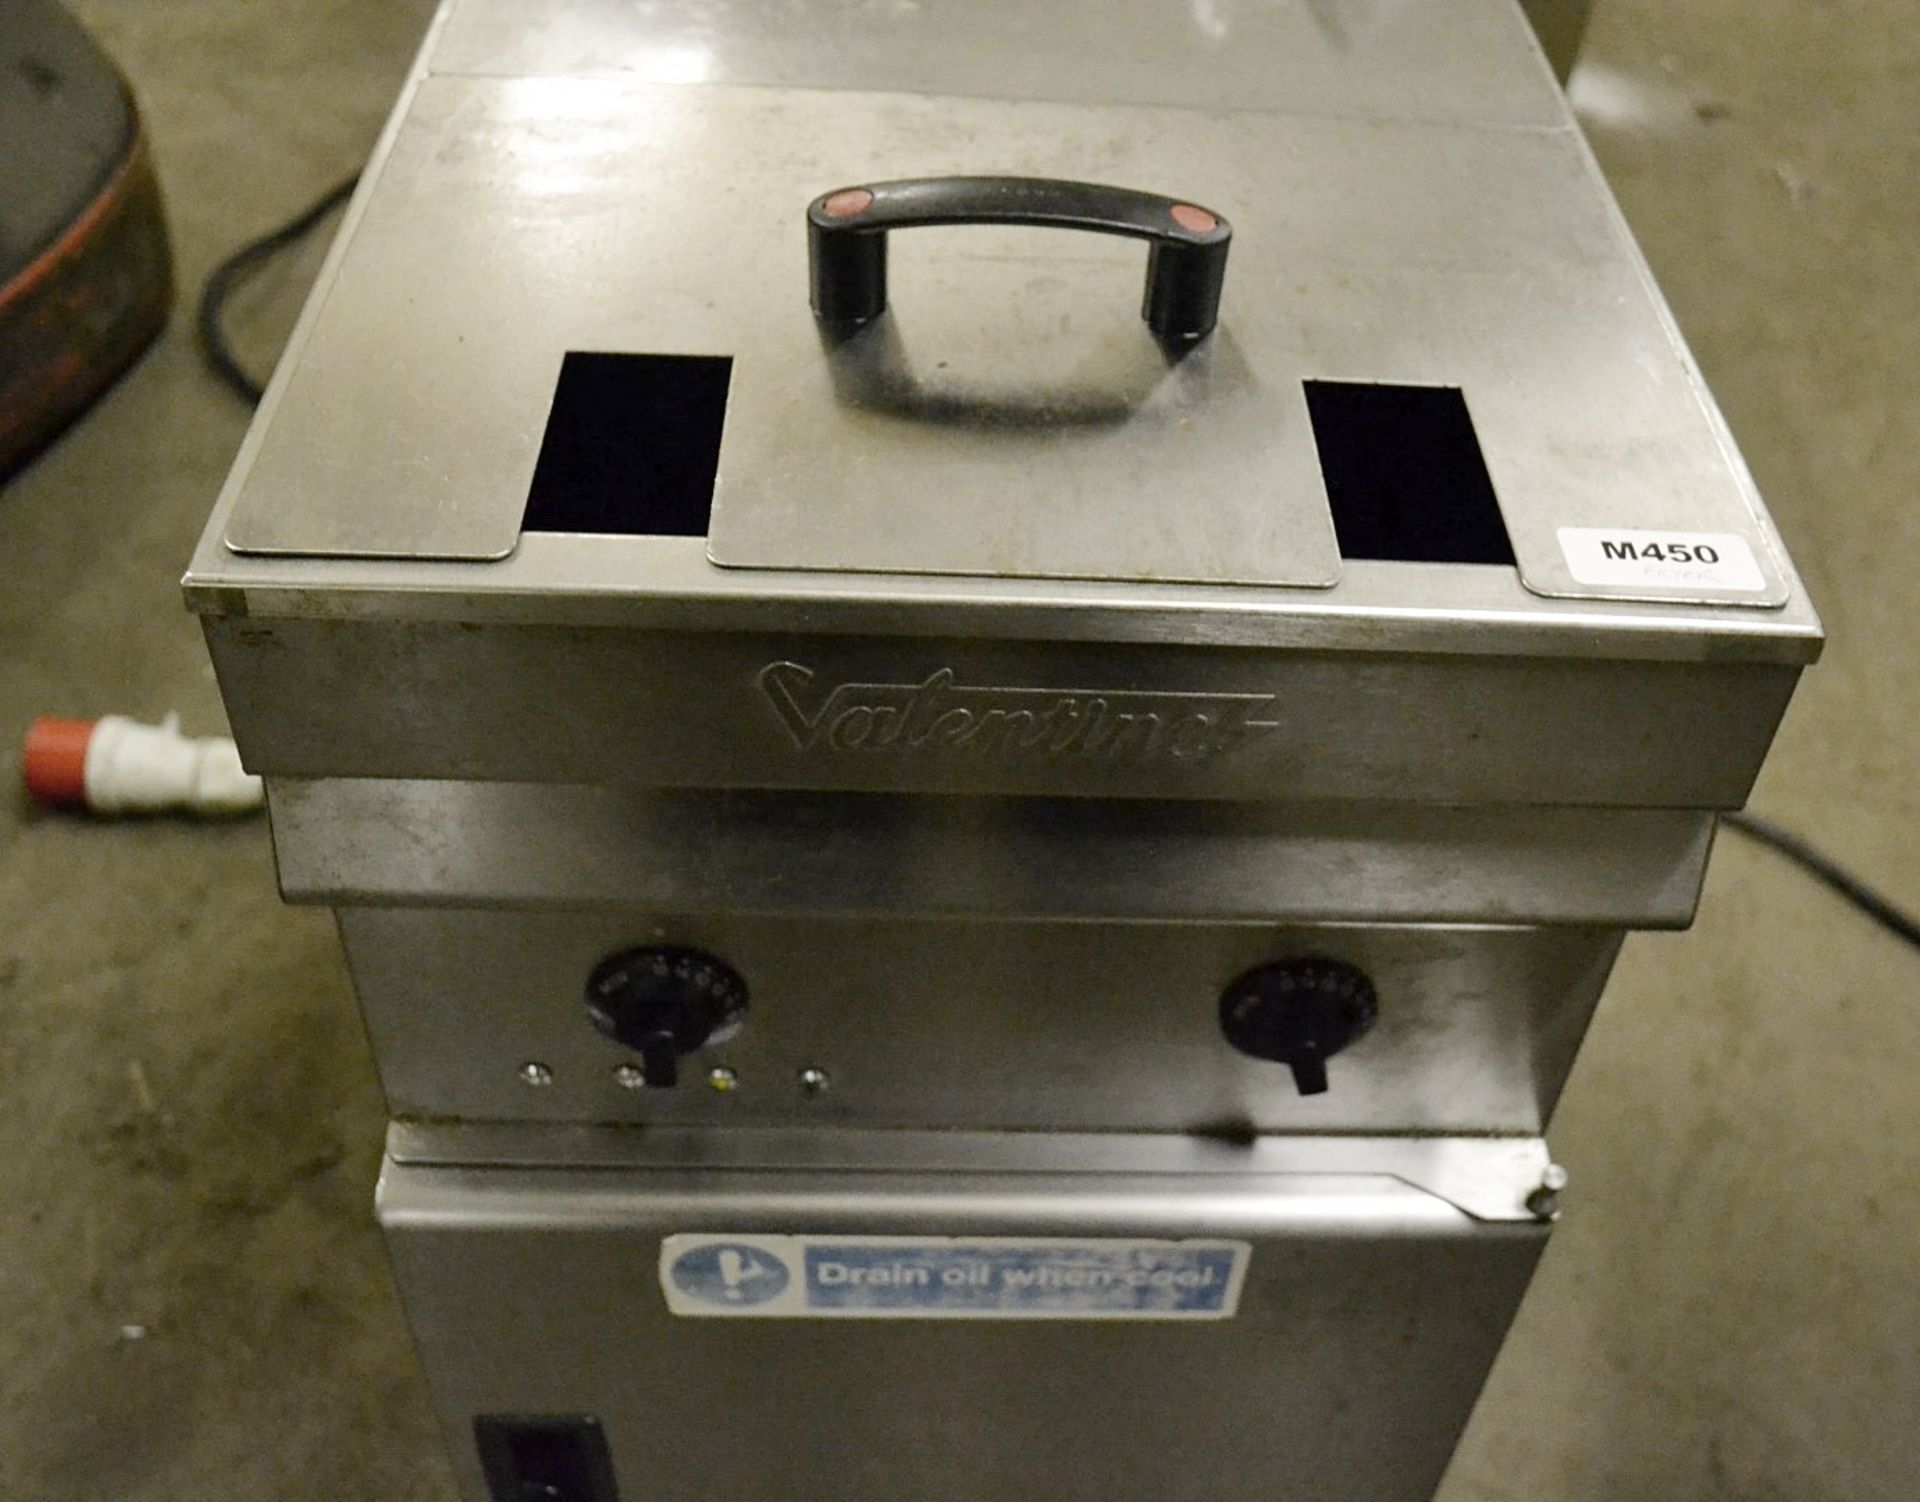 1 x Valentine Freestanding Electric Twin Basket Fryer - Approx 15 Litre Capacity - Easy Clean Stainl - Image 5 of 5